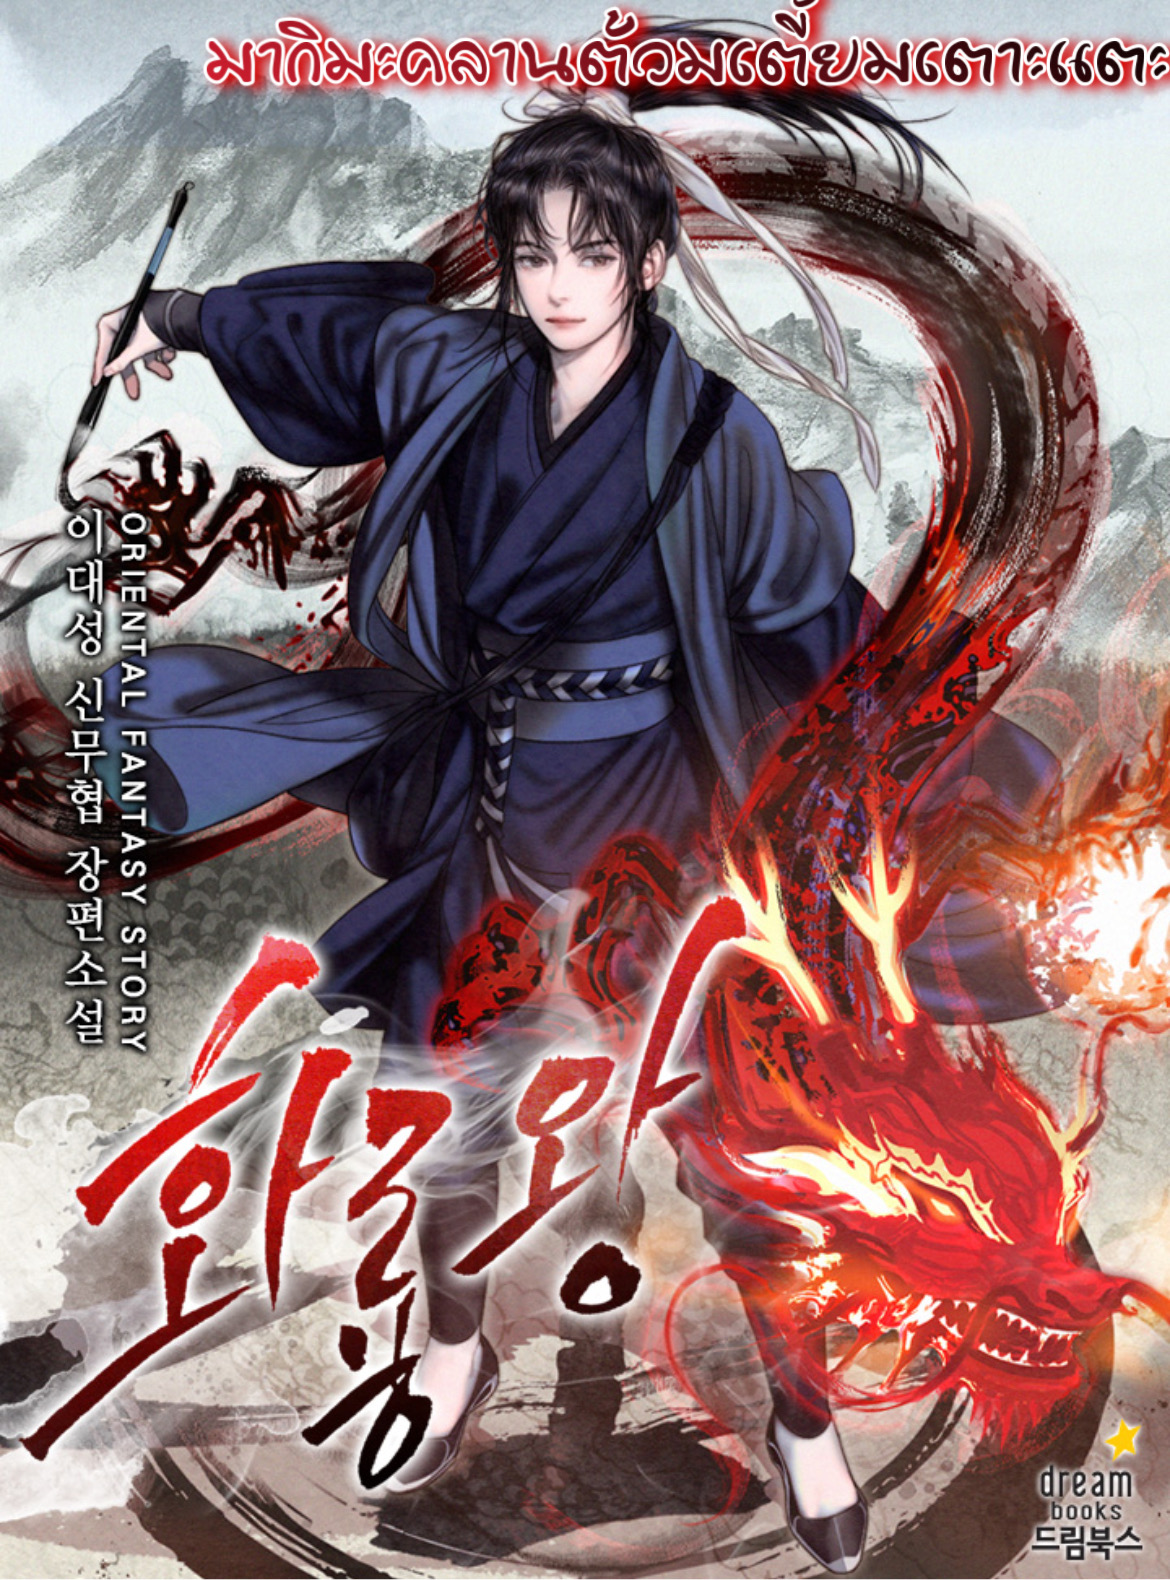 King of Fire Dragon 14 08